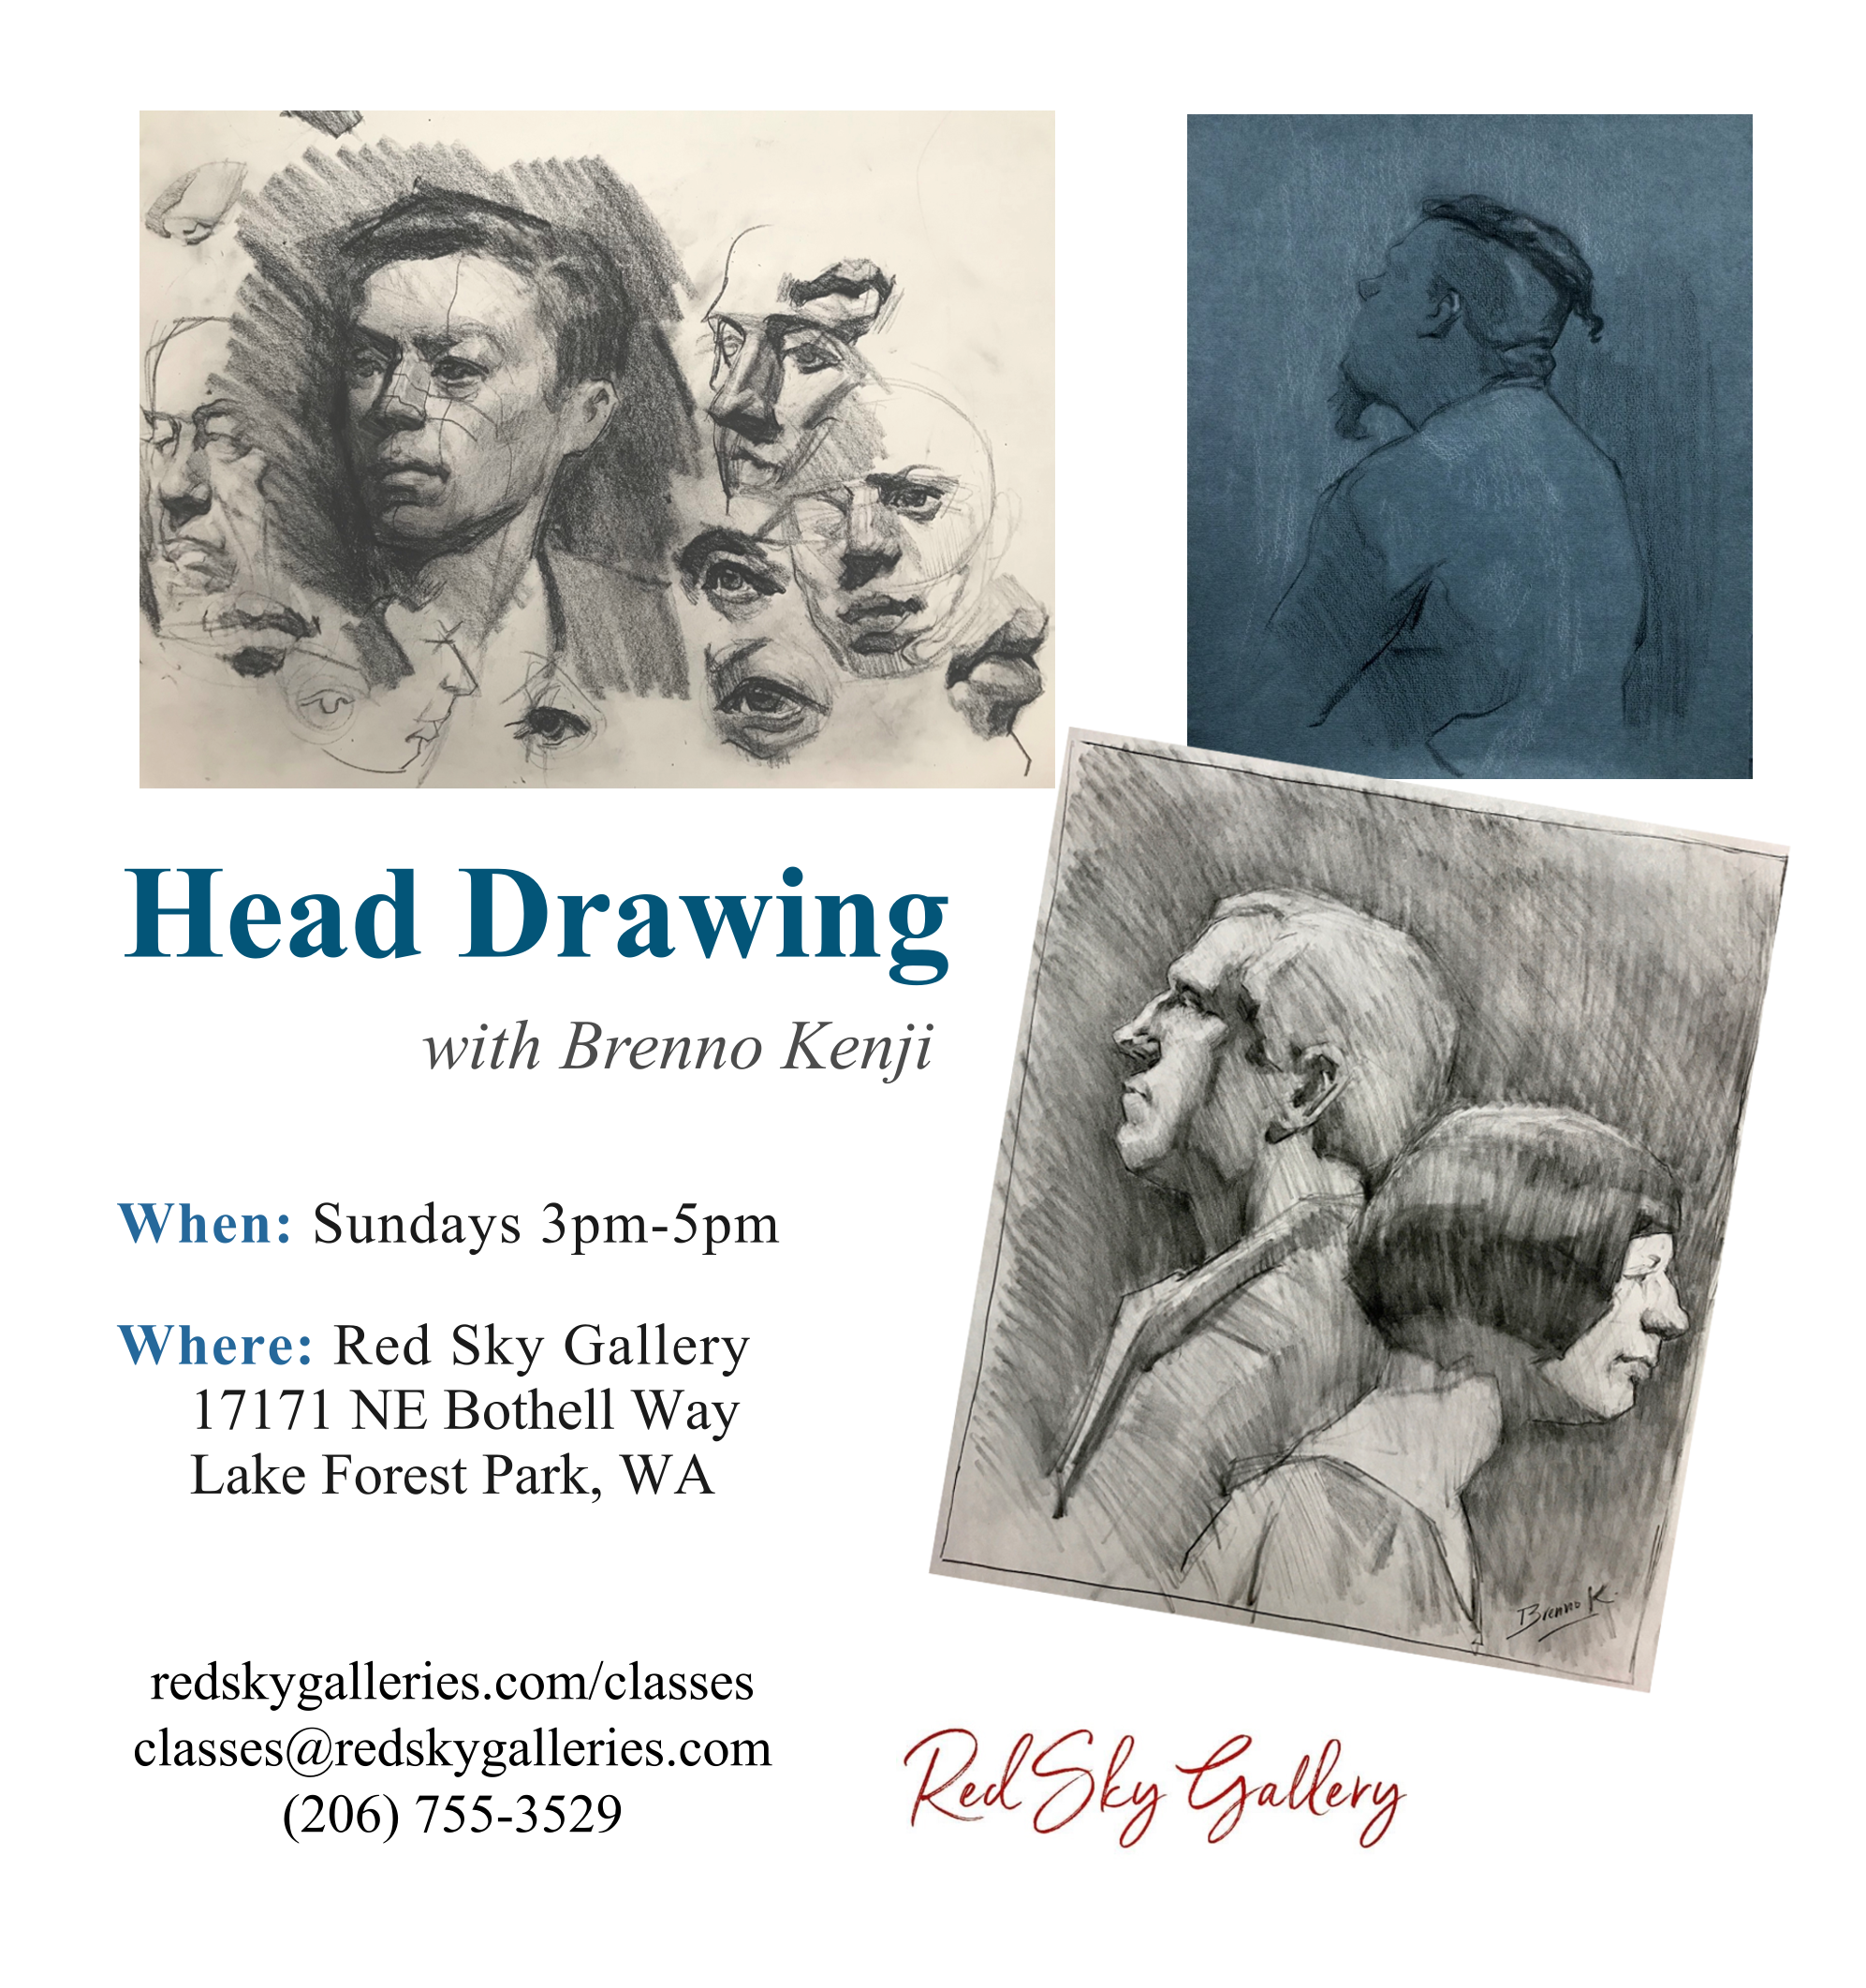 Head Drawing class with Brenno Kenji